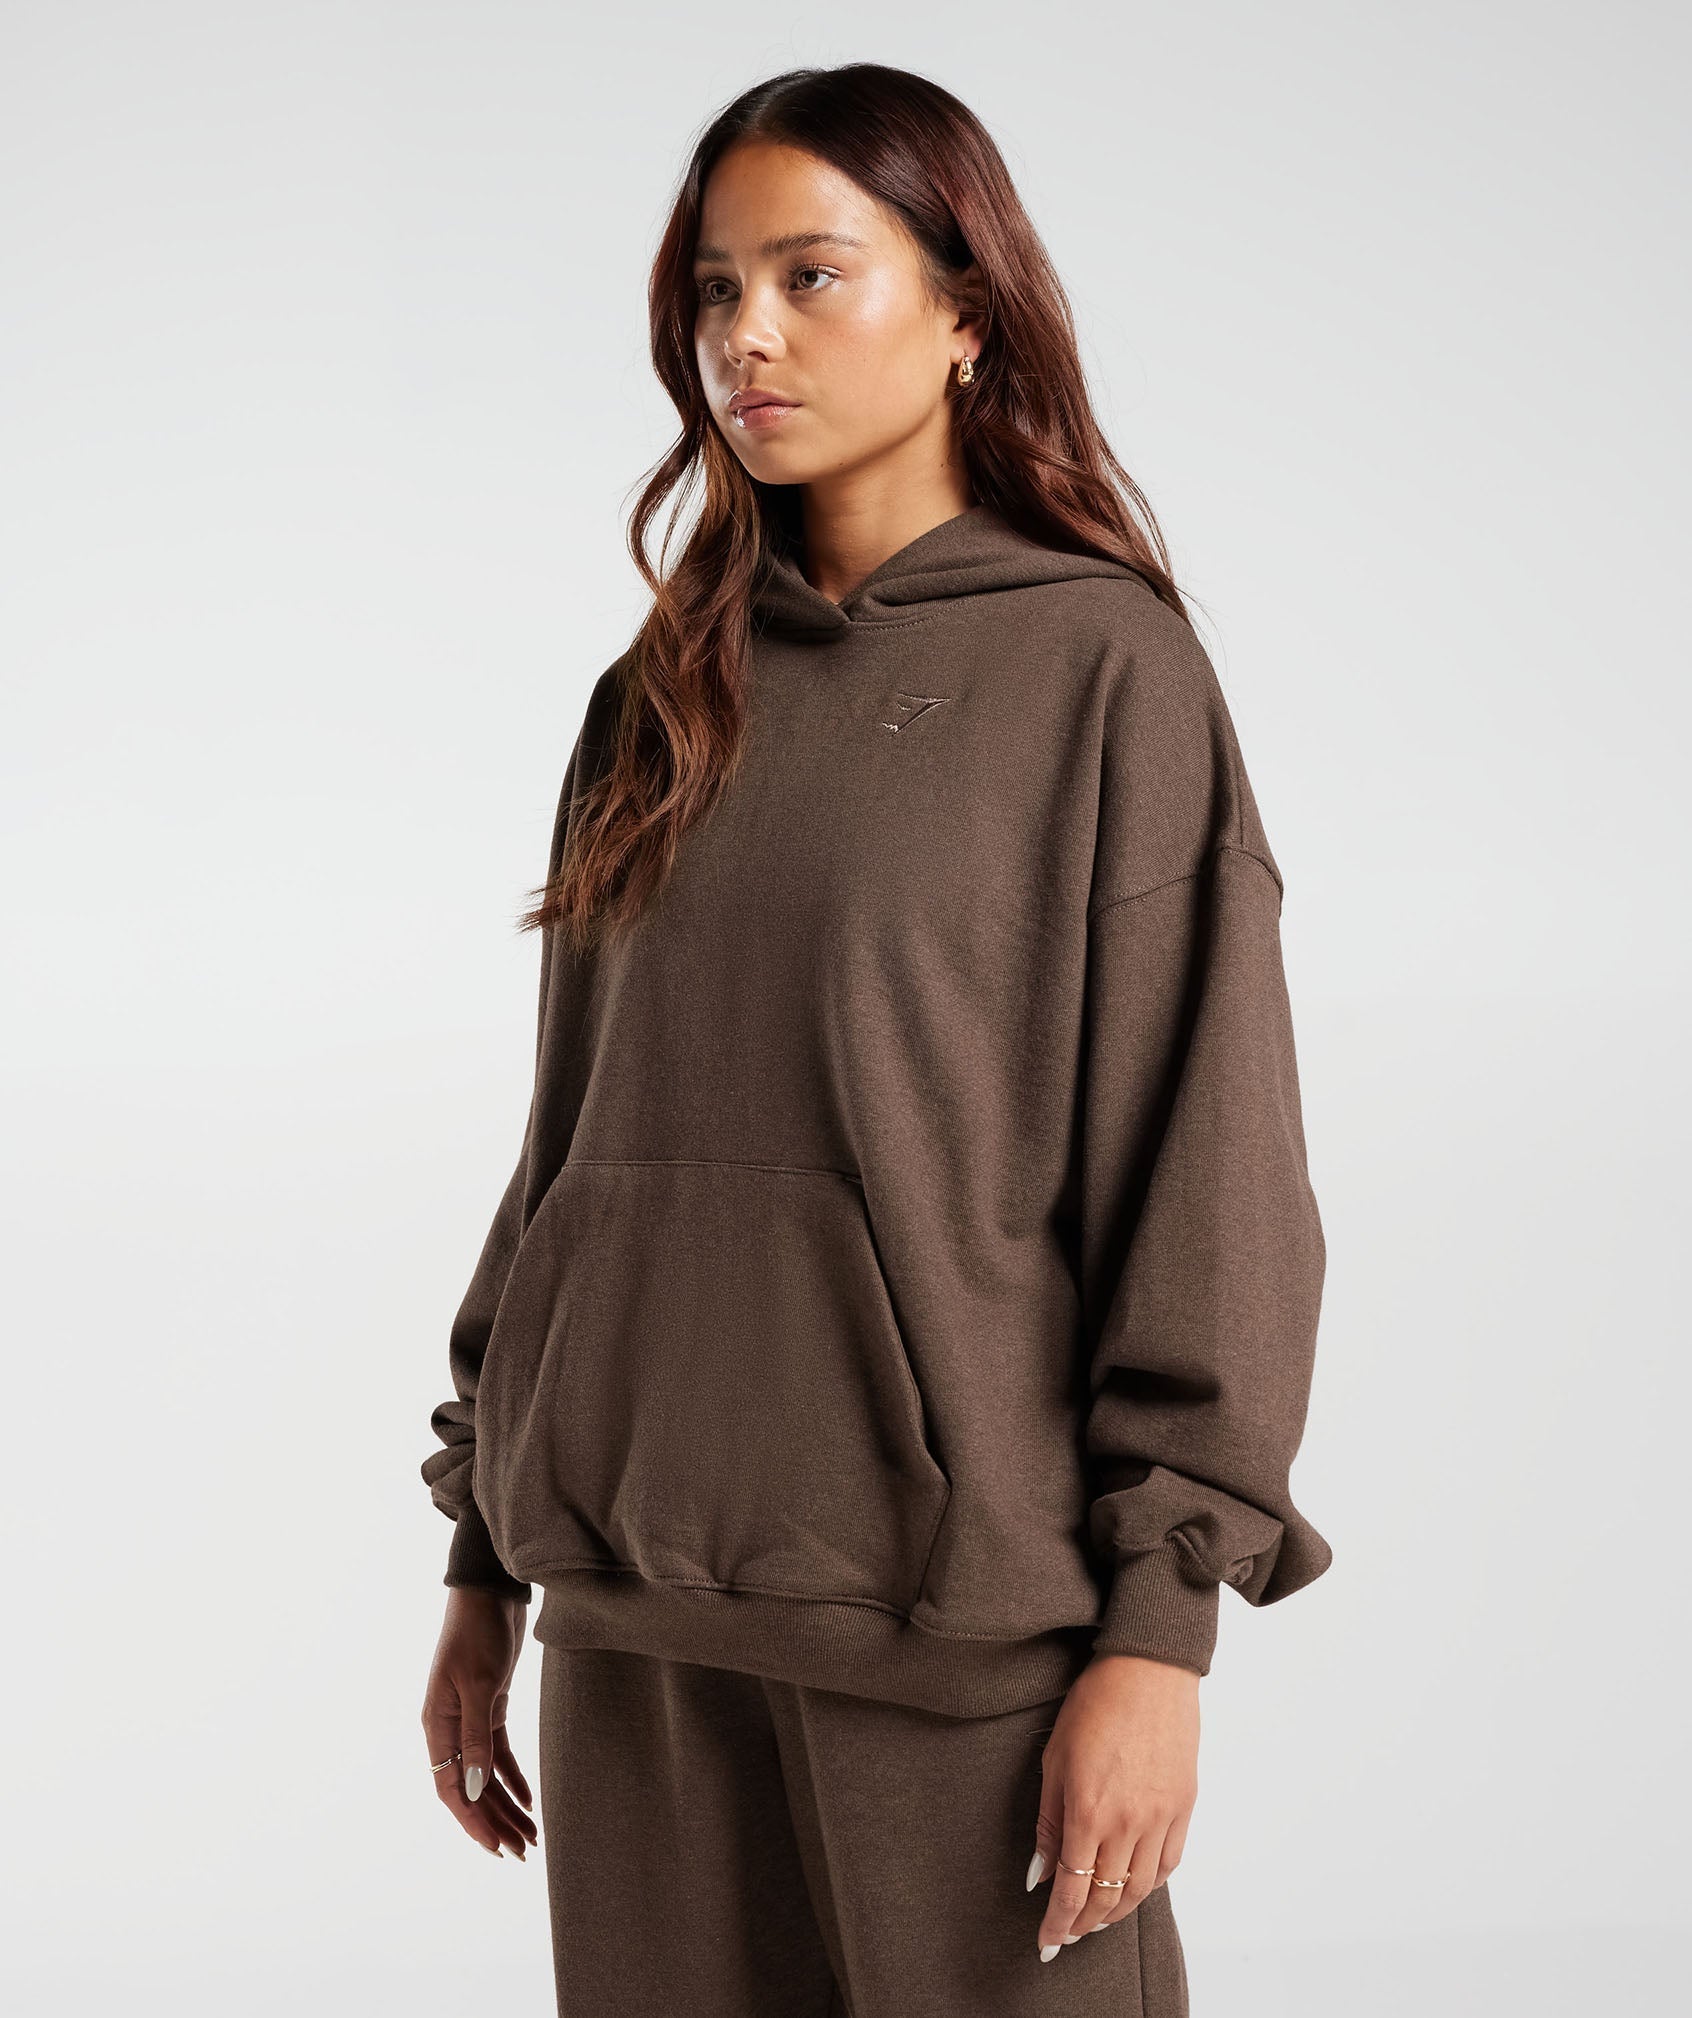 Rest Day Sweats Hoodie in Cozy Brown Marl - view 3